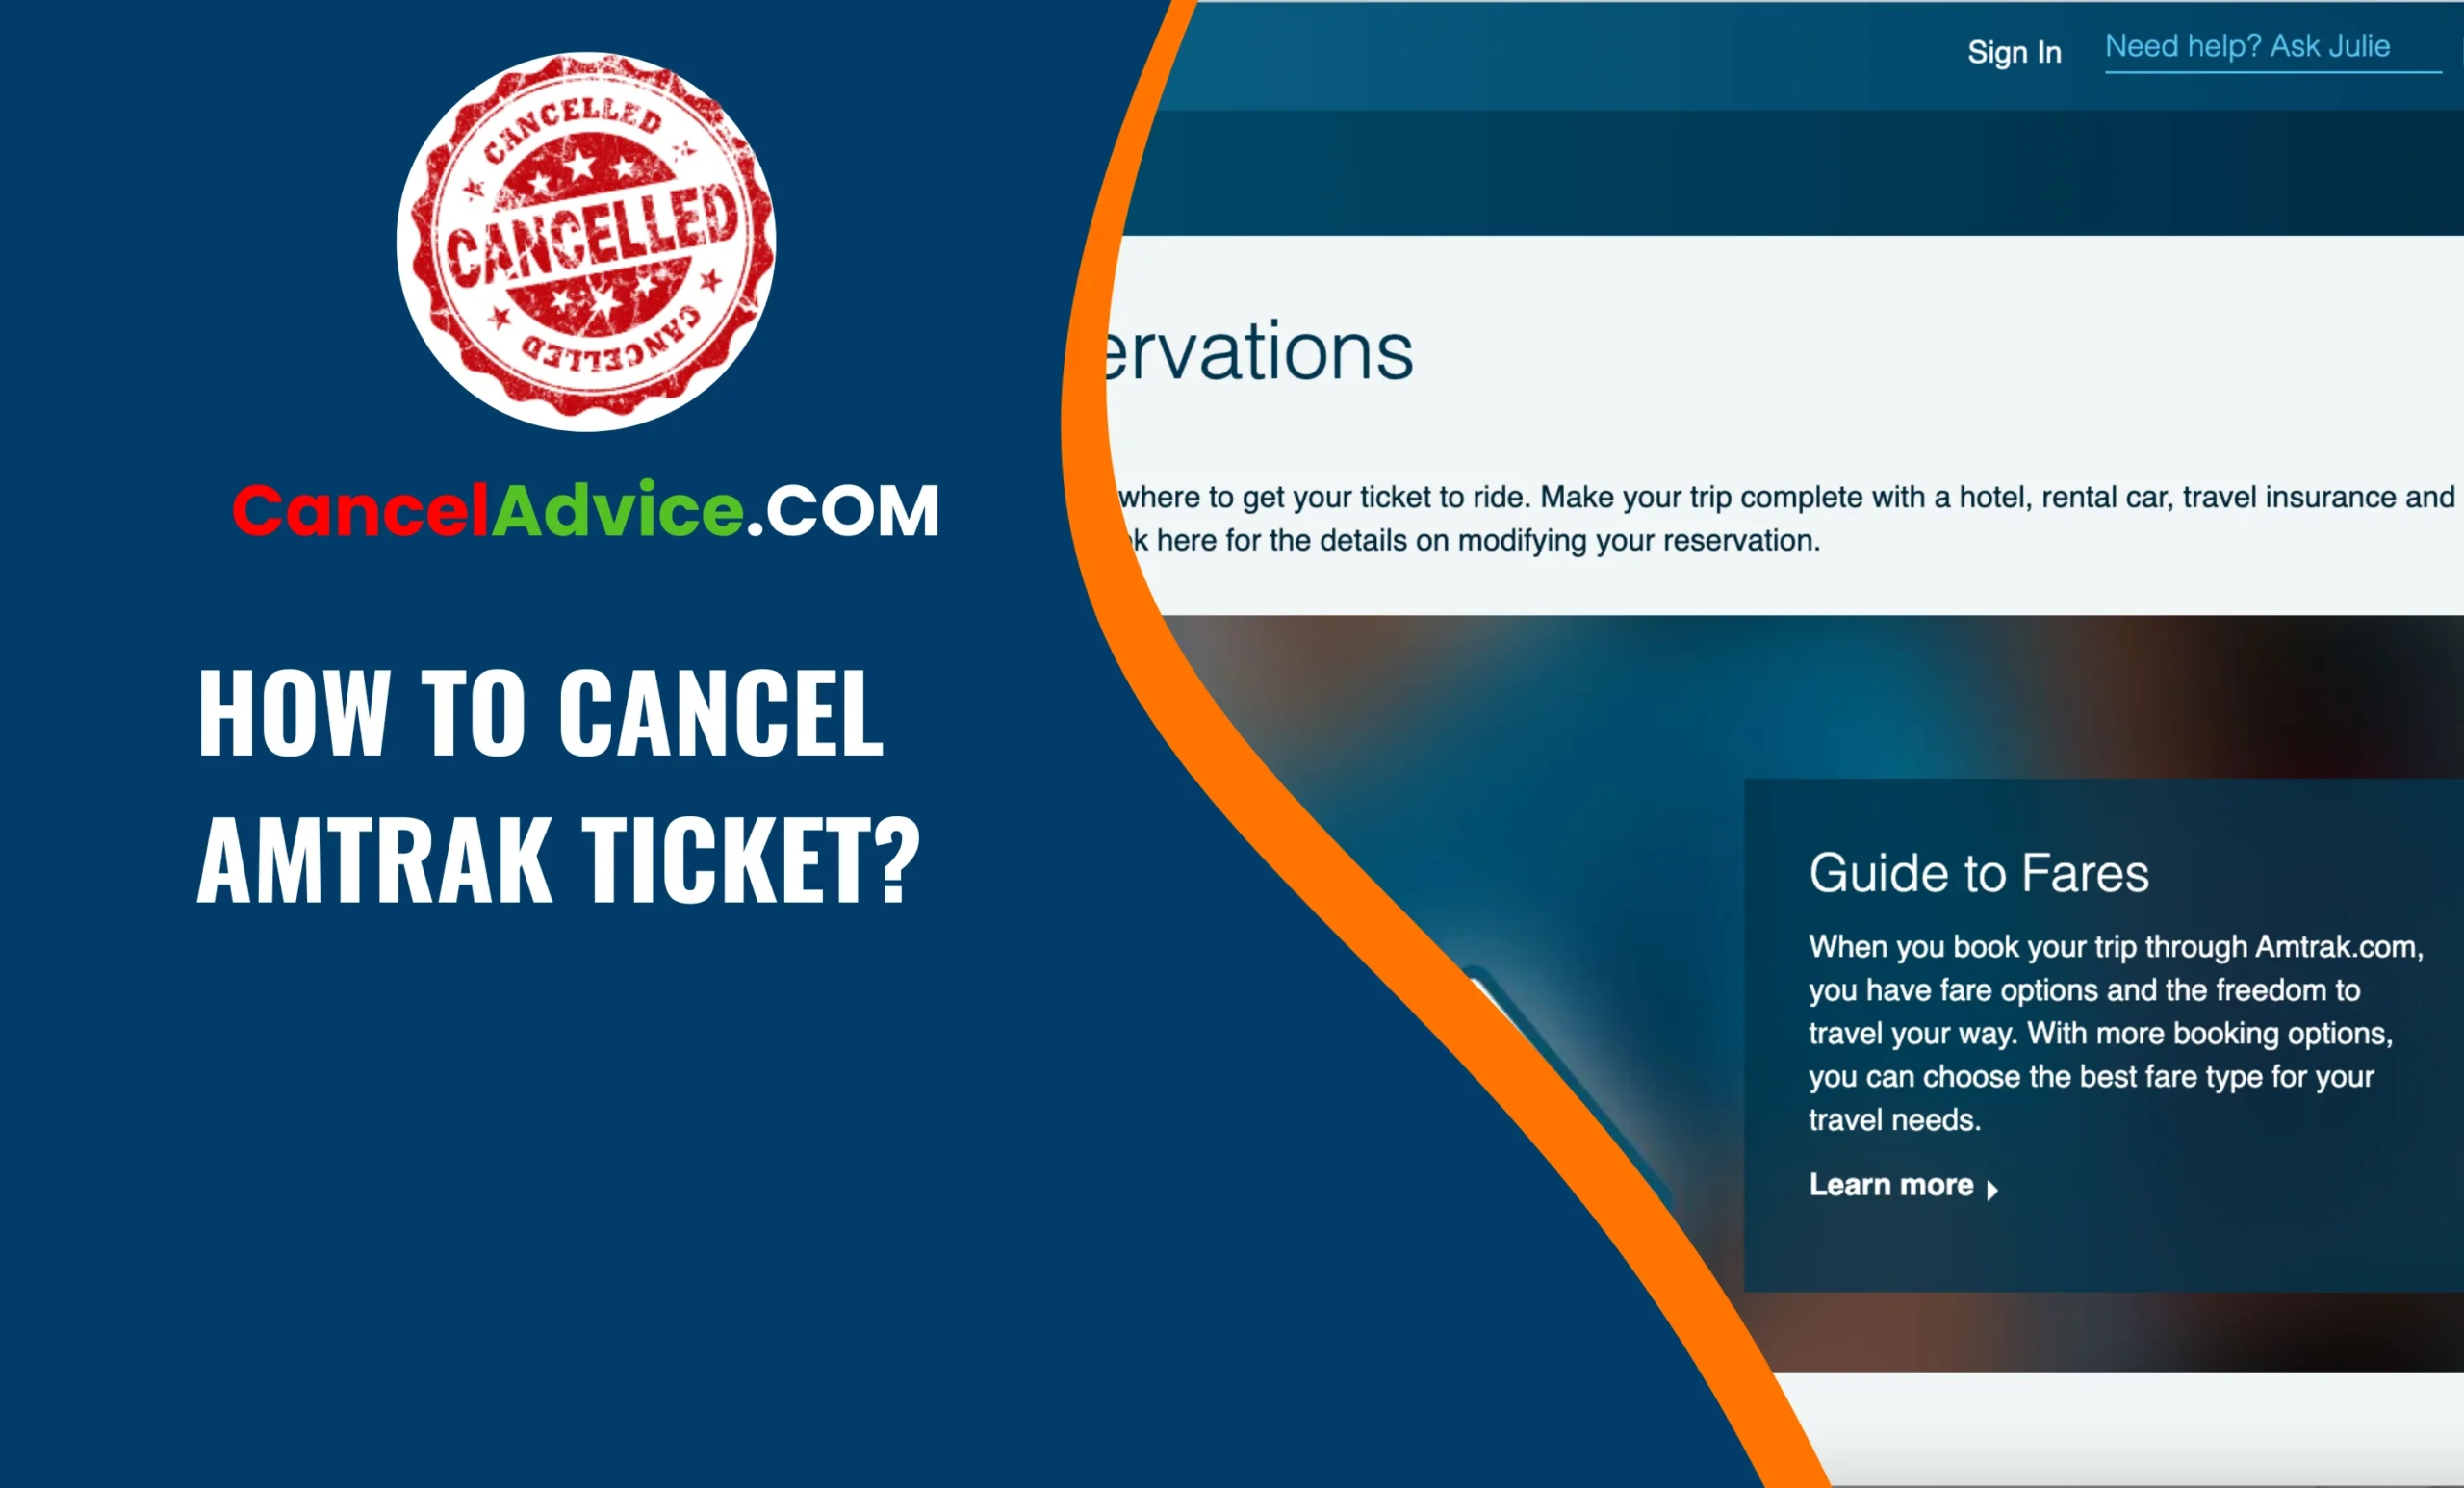 How to Cancel Your Amtrak Ticket